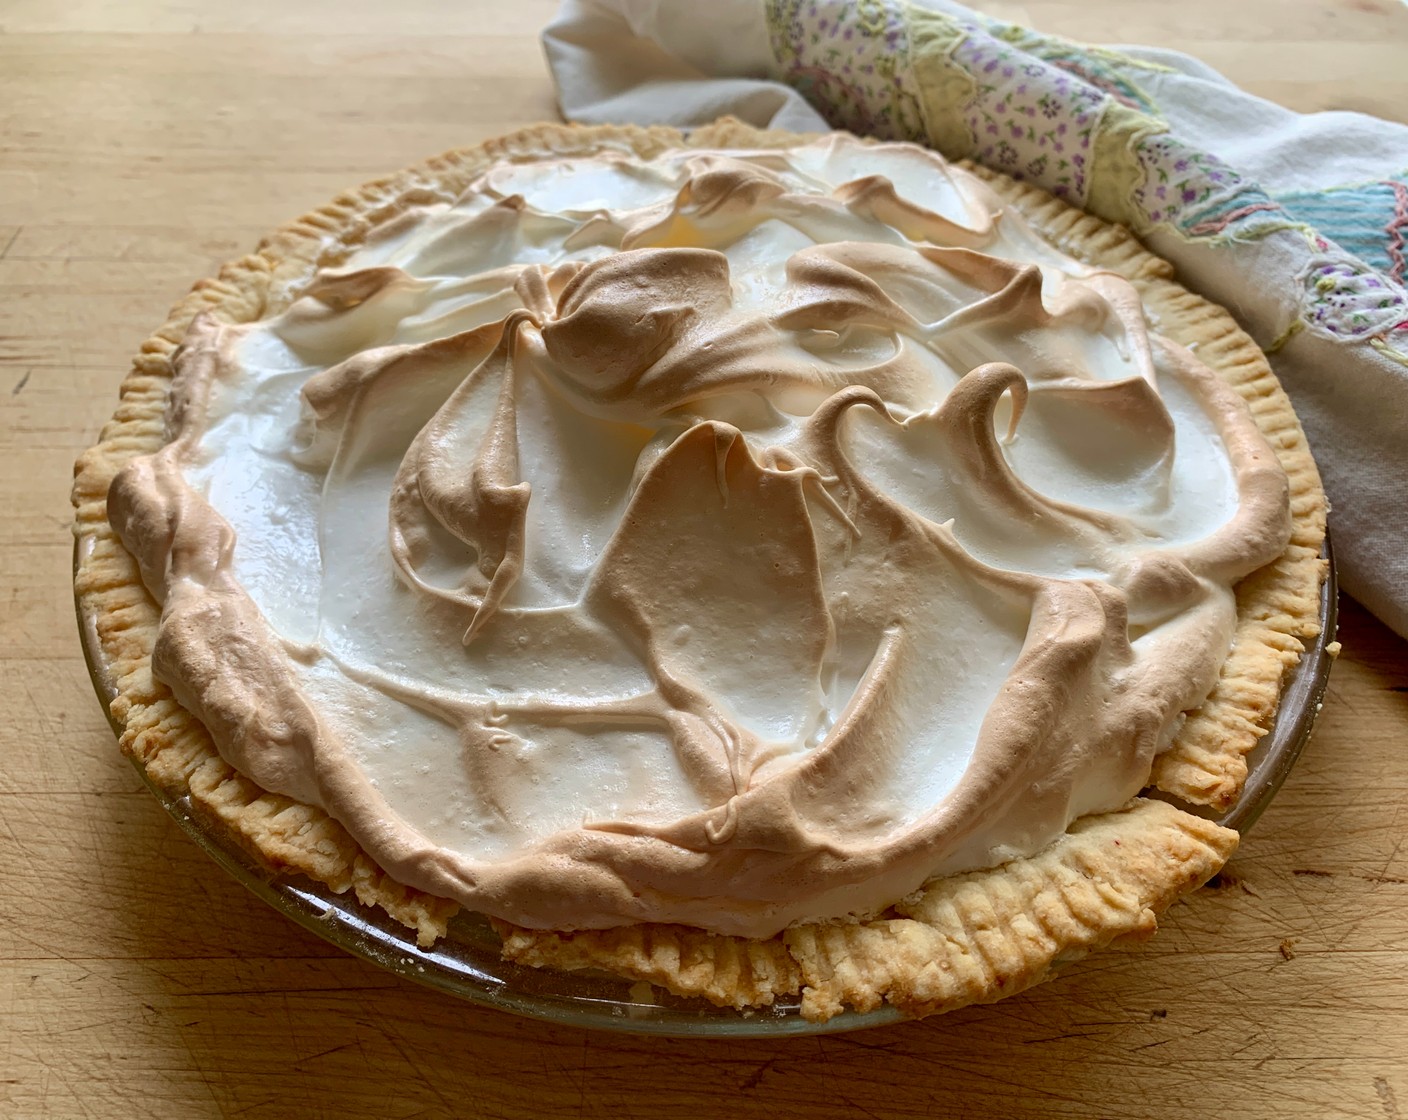 step 11 Reduce the temperature of the oven to 350 degrees F (180 degrees C) and bake the pie for 15 minutes until the meringue is golden.